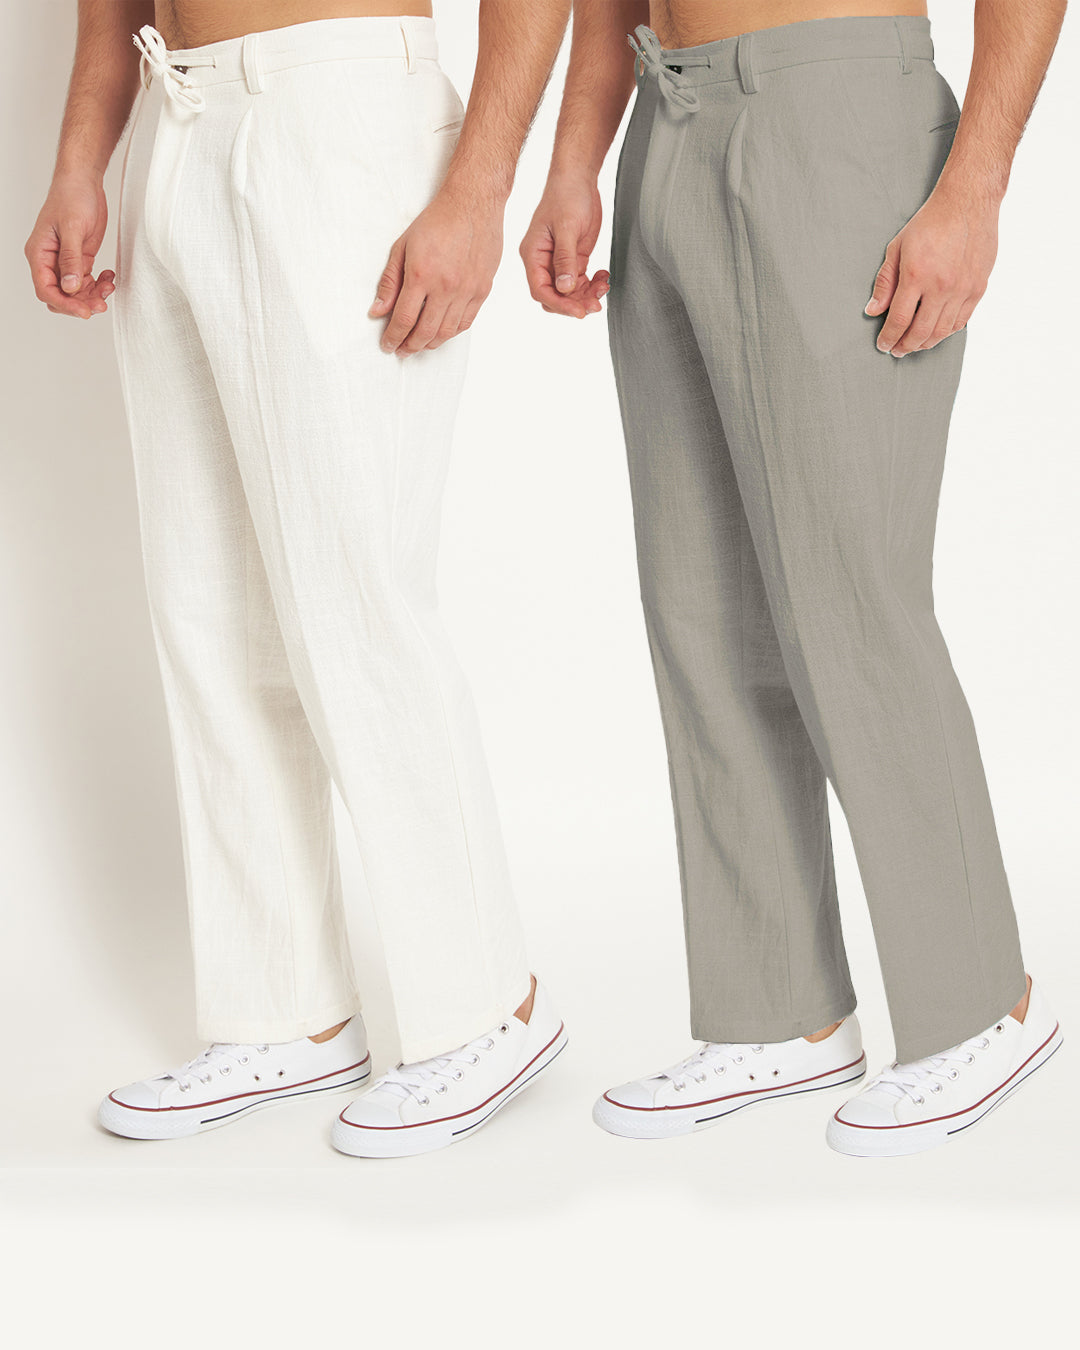 Combo: Casual Ease Iced Grey & White Men's Pants - Set of 2